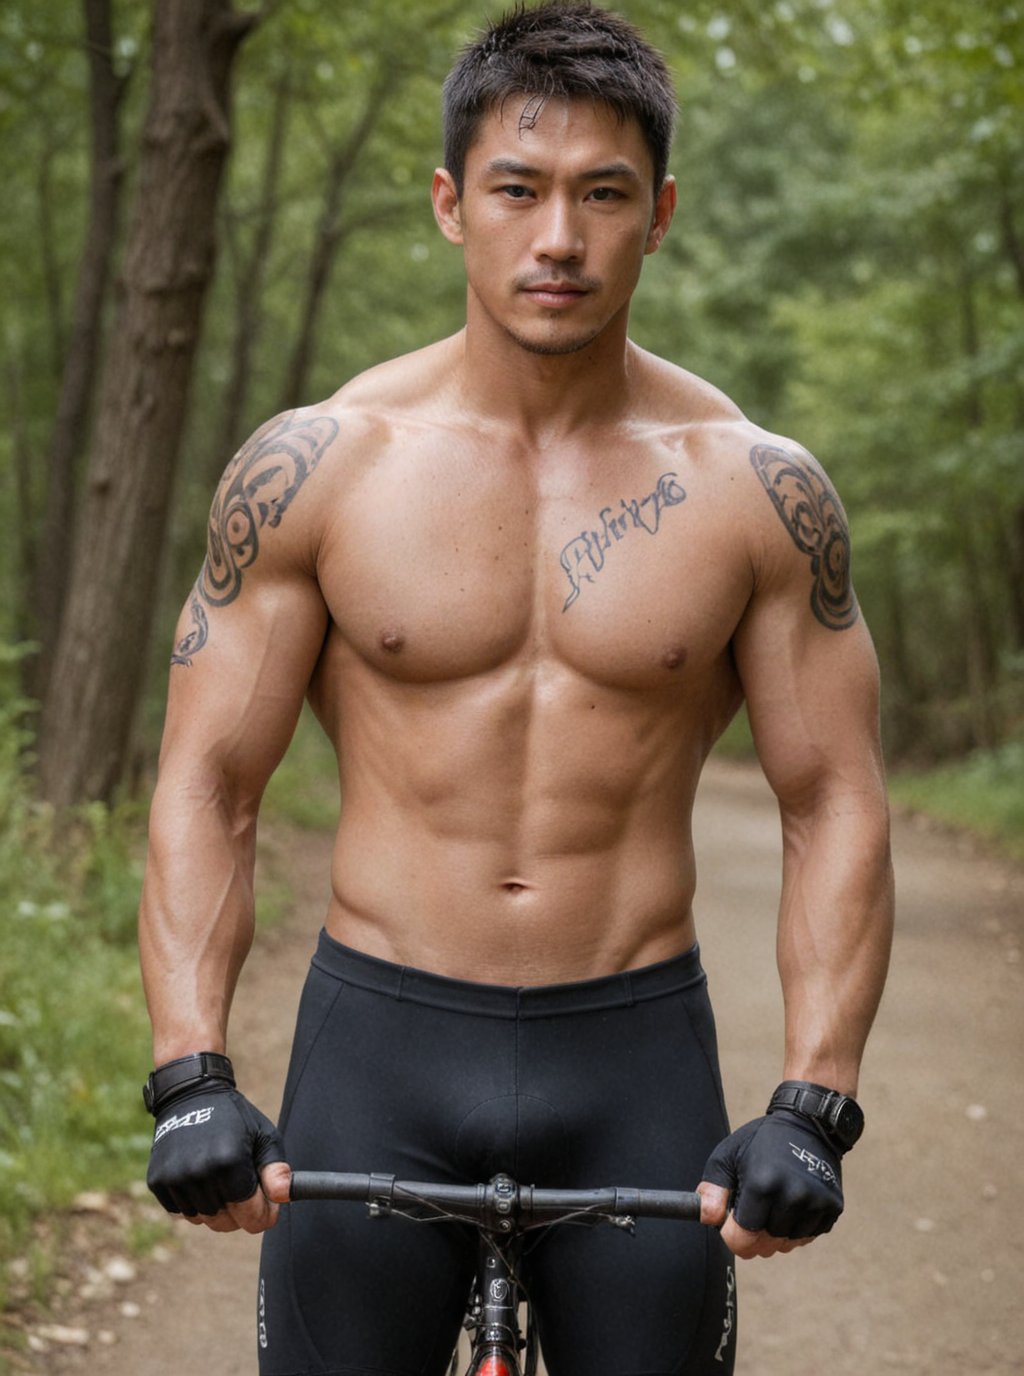 Score_9, score_8_up, score_7_up, score_6_up, score_5_up, score_4_up:
High-impact:100%, No an shadow on face, A rugged Japanese man , short hair, and chiseled physique ,  stands tall, He wearing a Cycling suits that accentuates his impressively chiseled muscles, glove,without bicycle, Sharp focus, dynamic pose with smail, exuding confidence and masculinity ,(cyclin
Without bicycle on picture), outdoors shot, cool body tattoo 